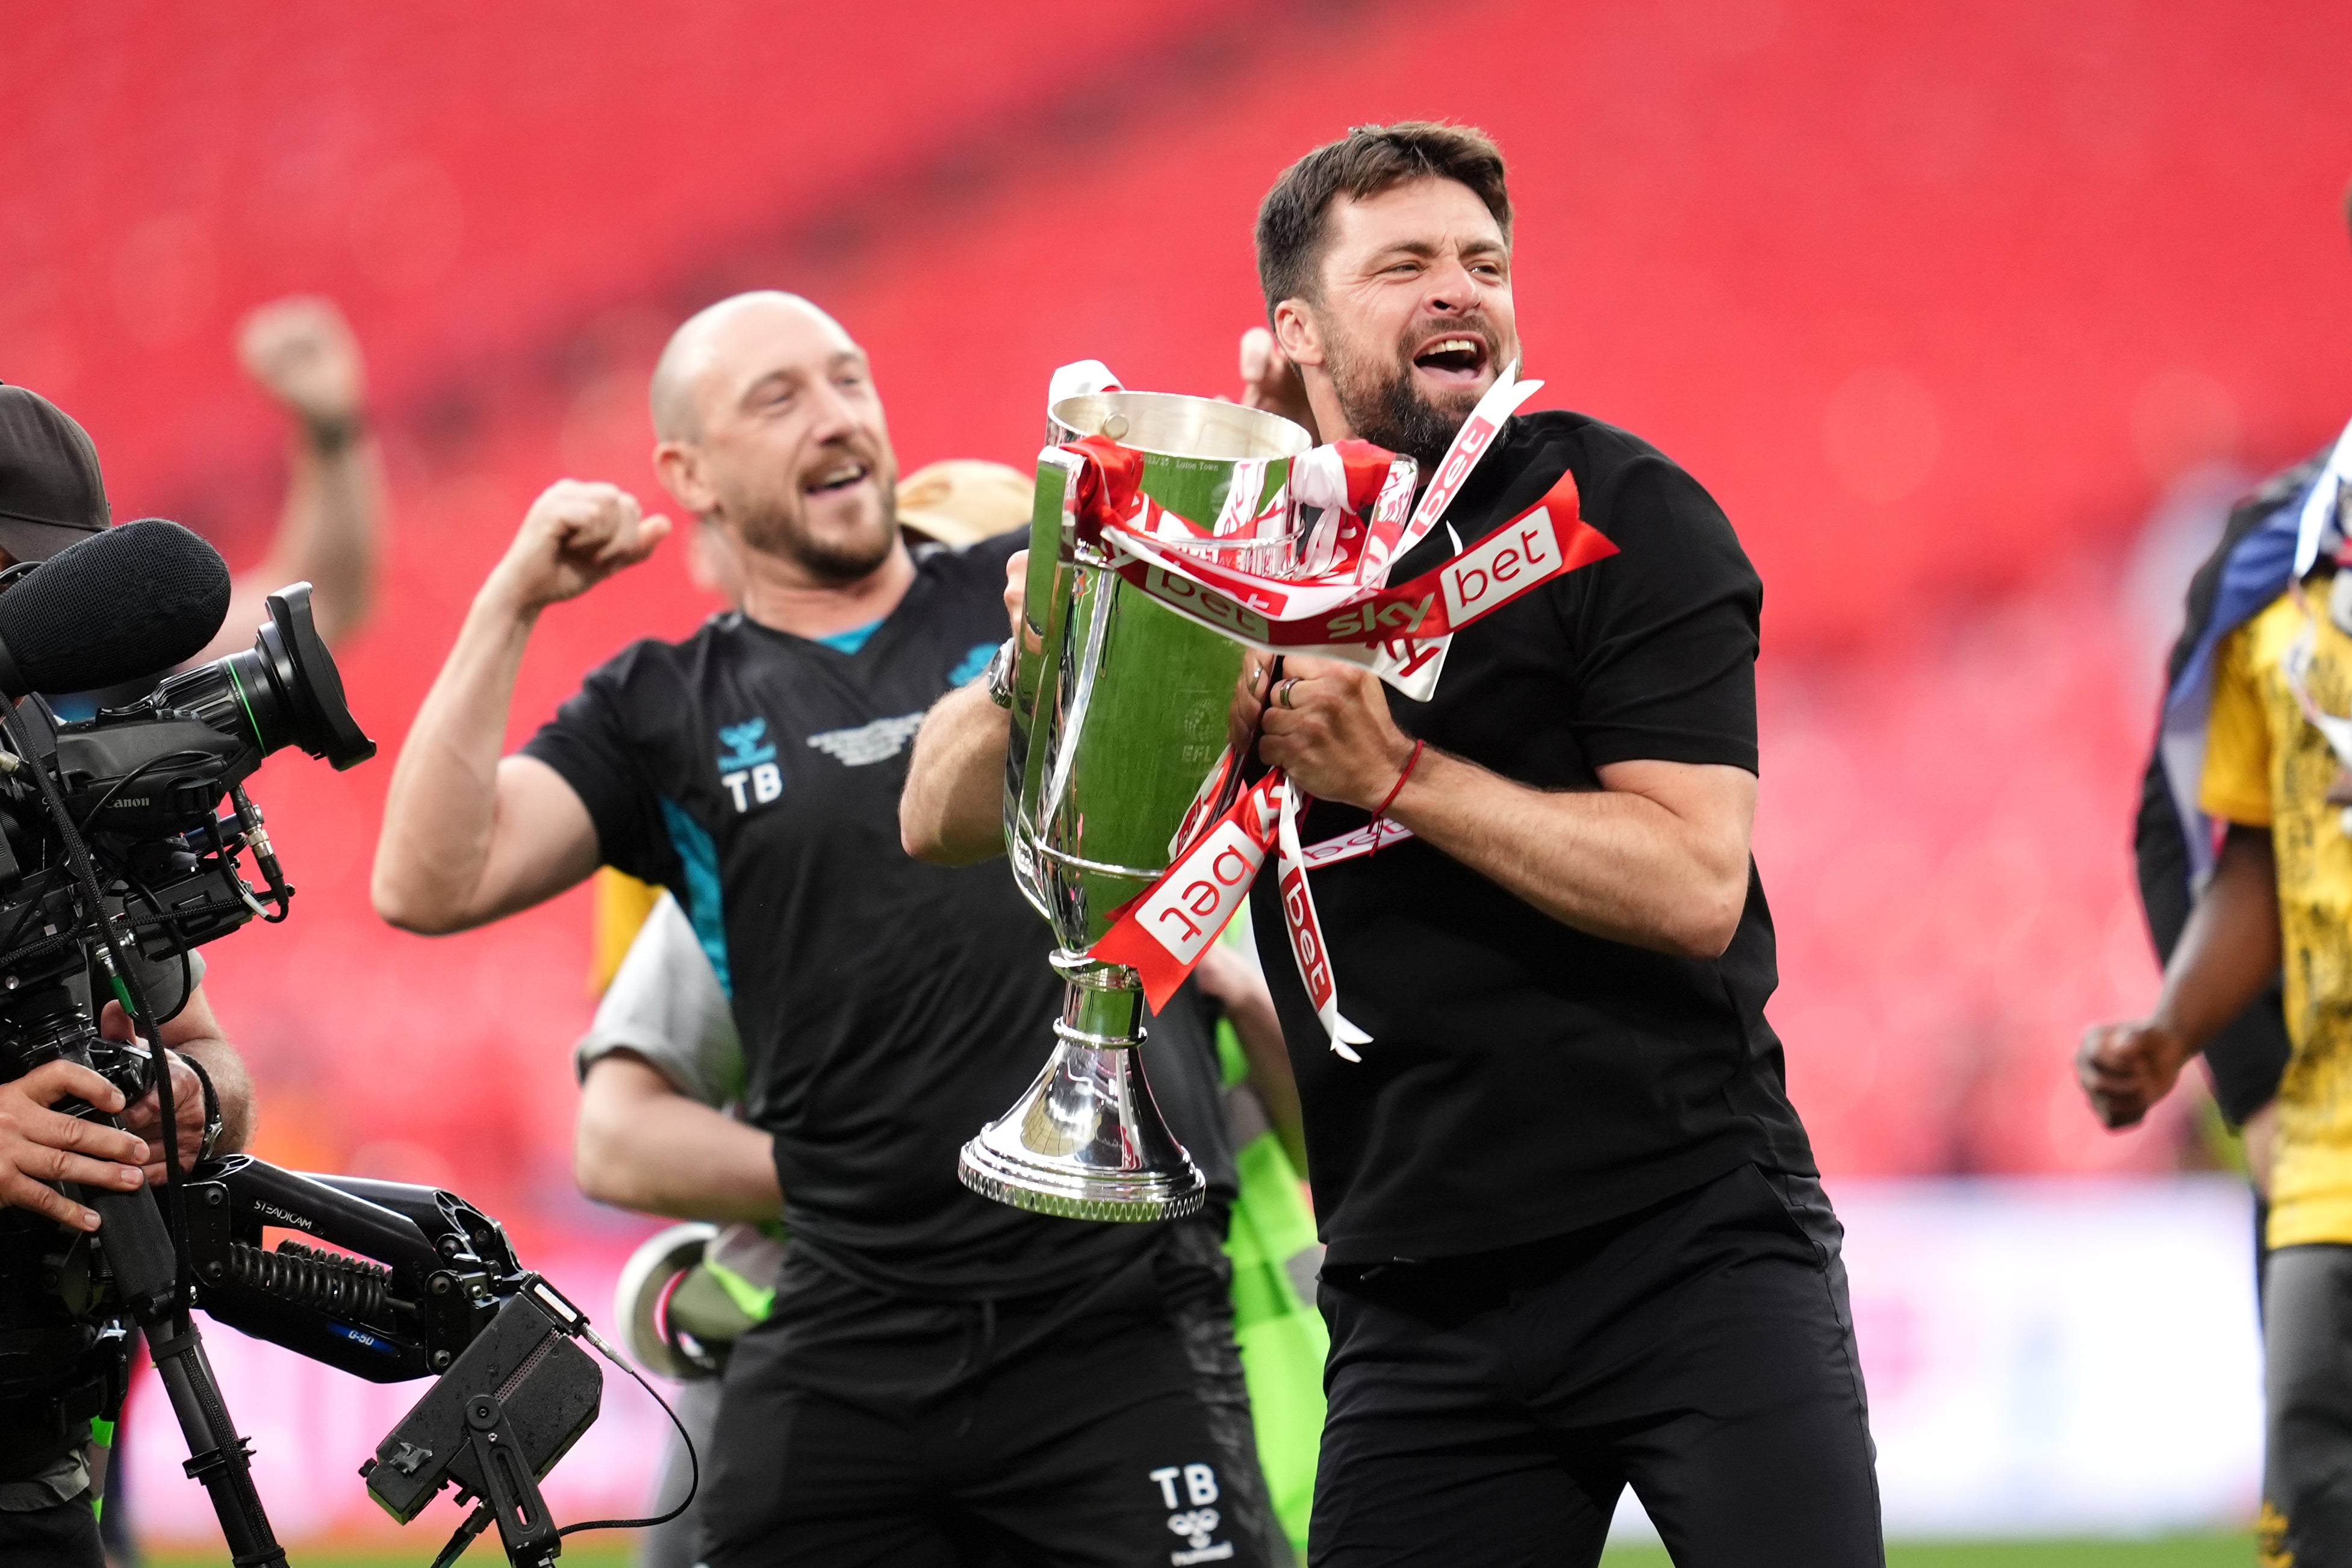 Russell Martin guided Southampton to play-off glory at Wembley